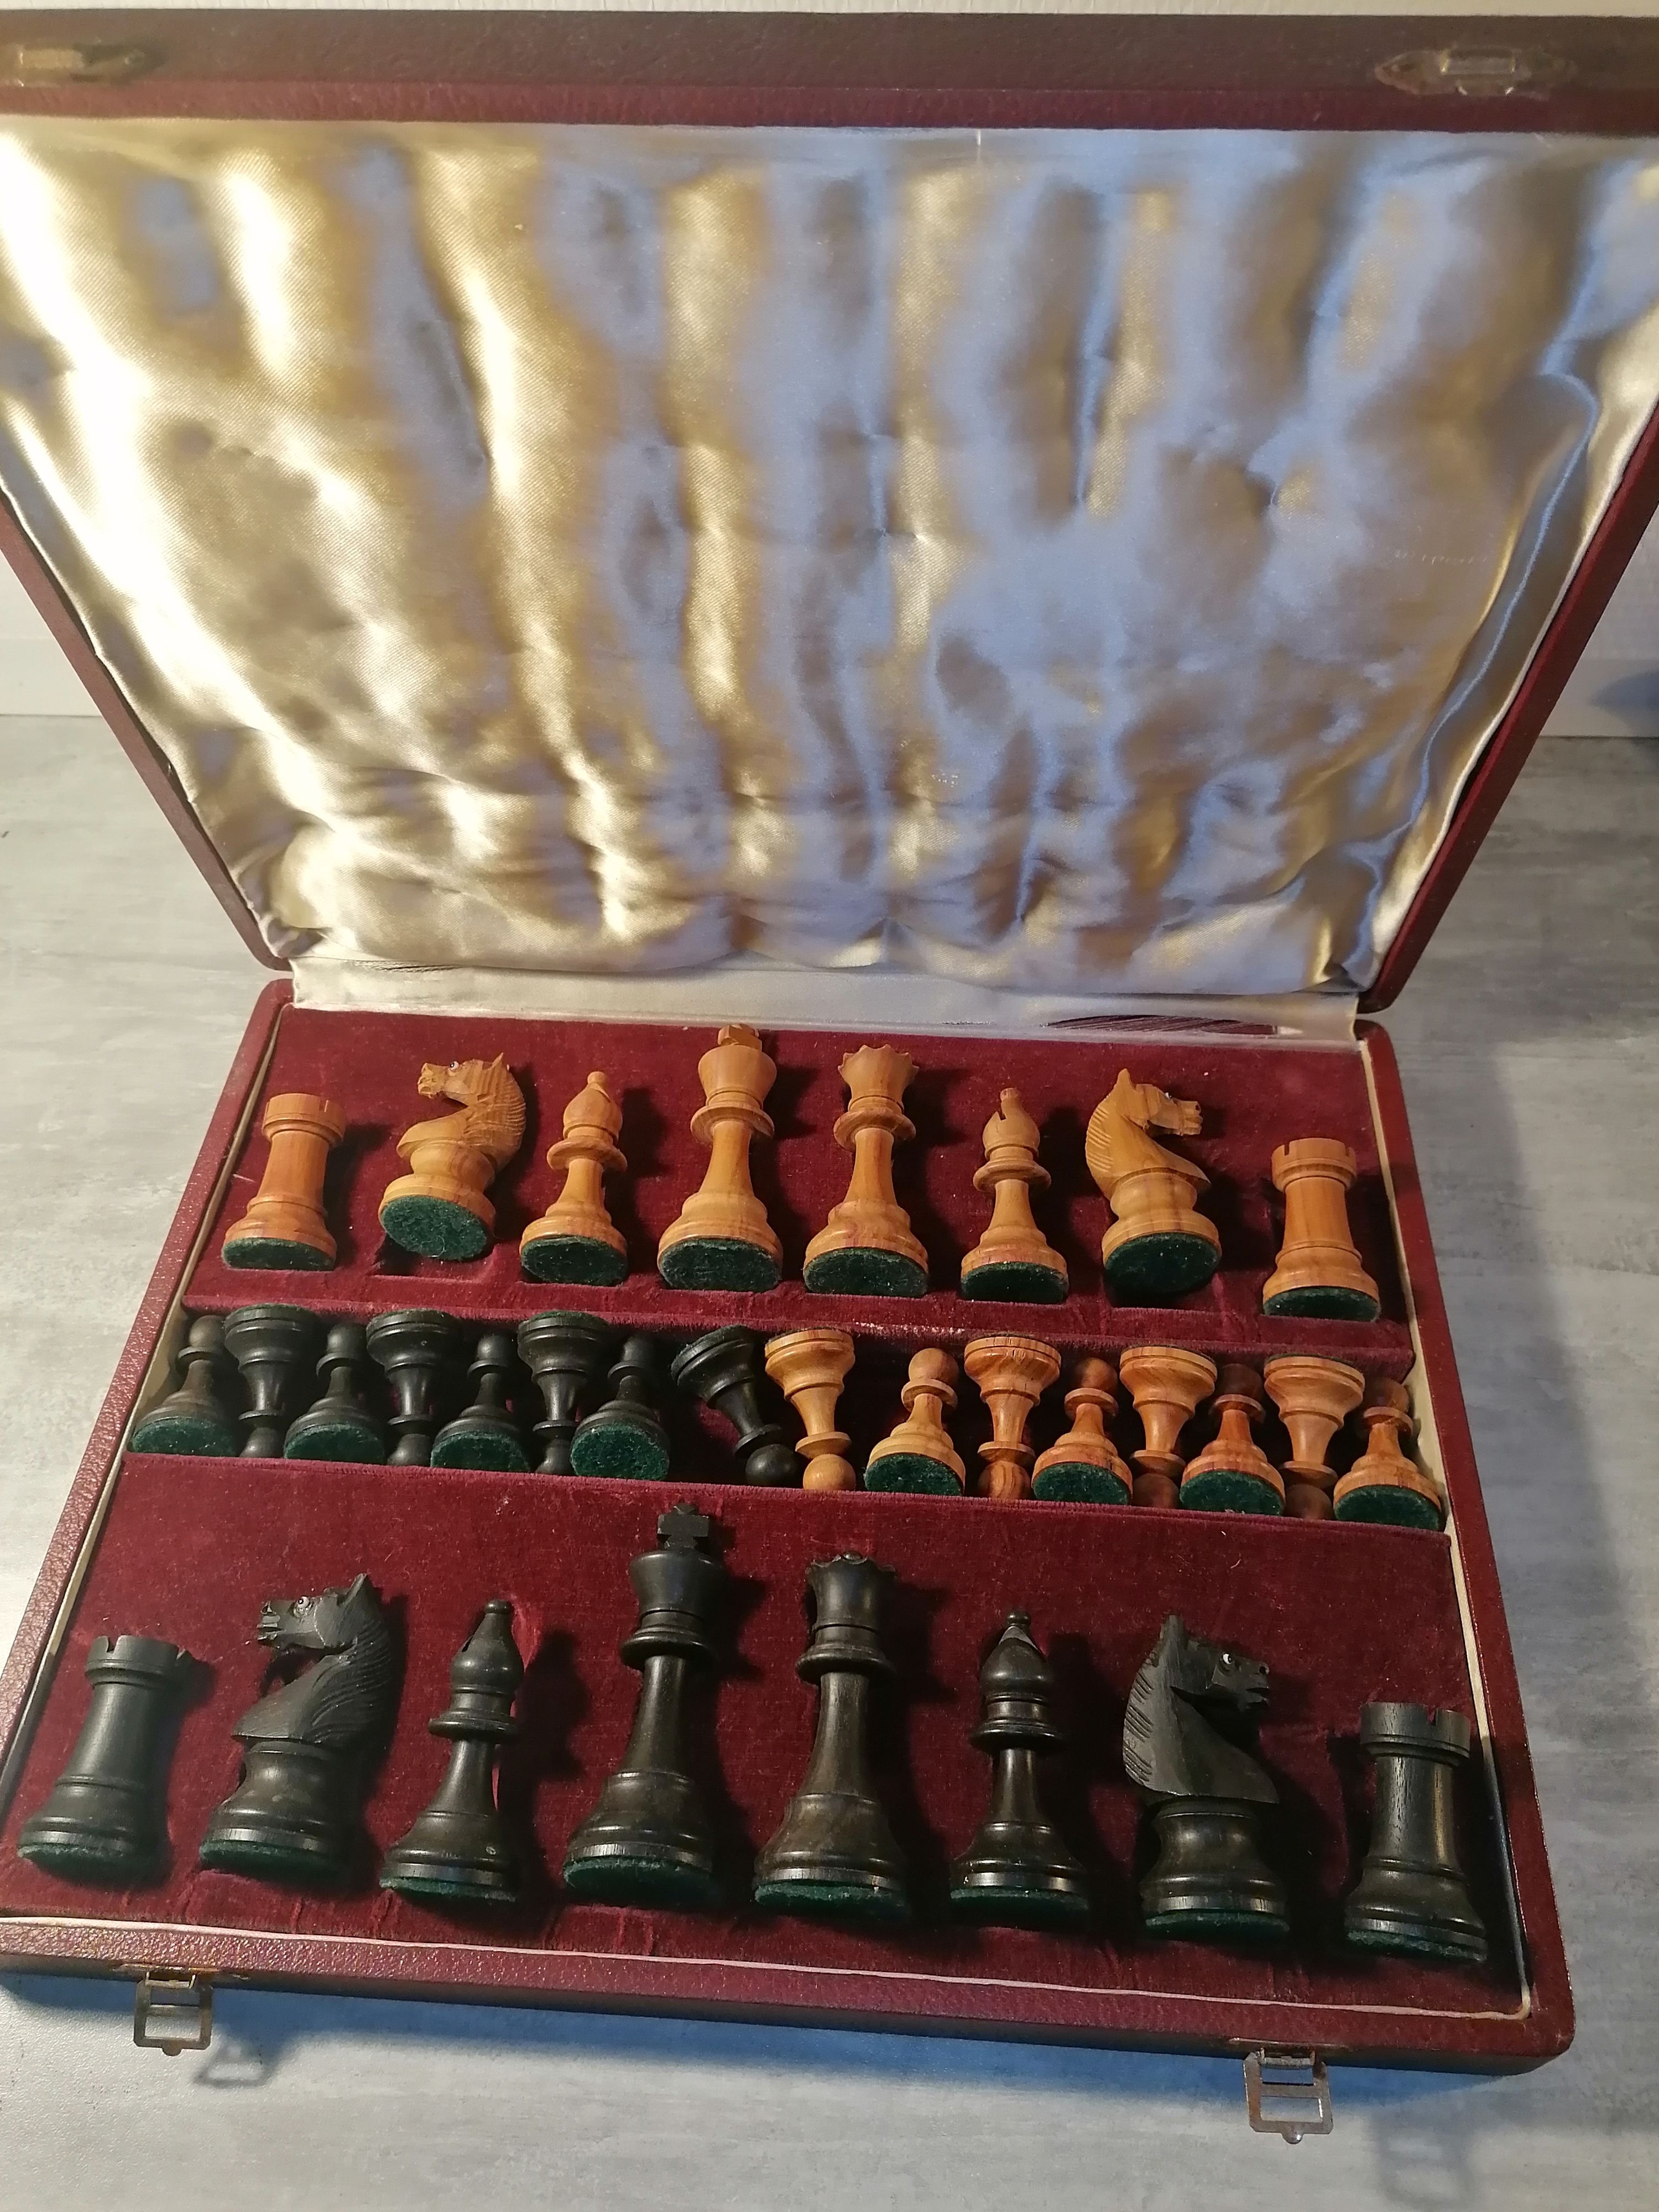 English Opening - Chess Forums 